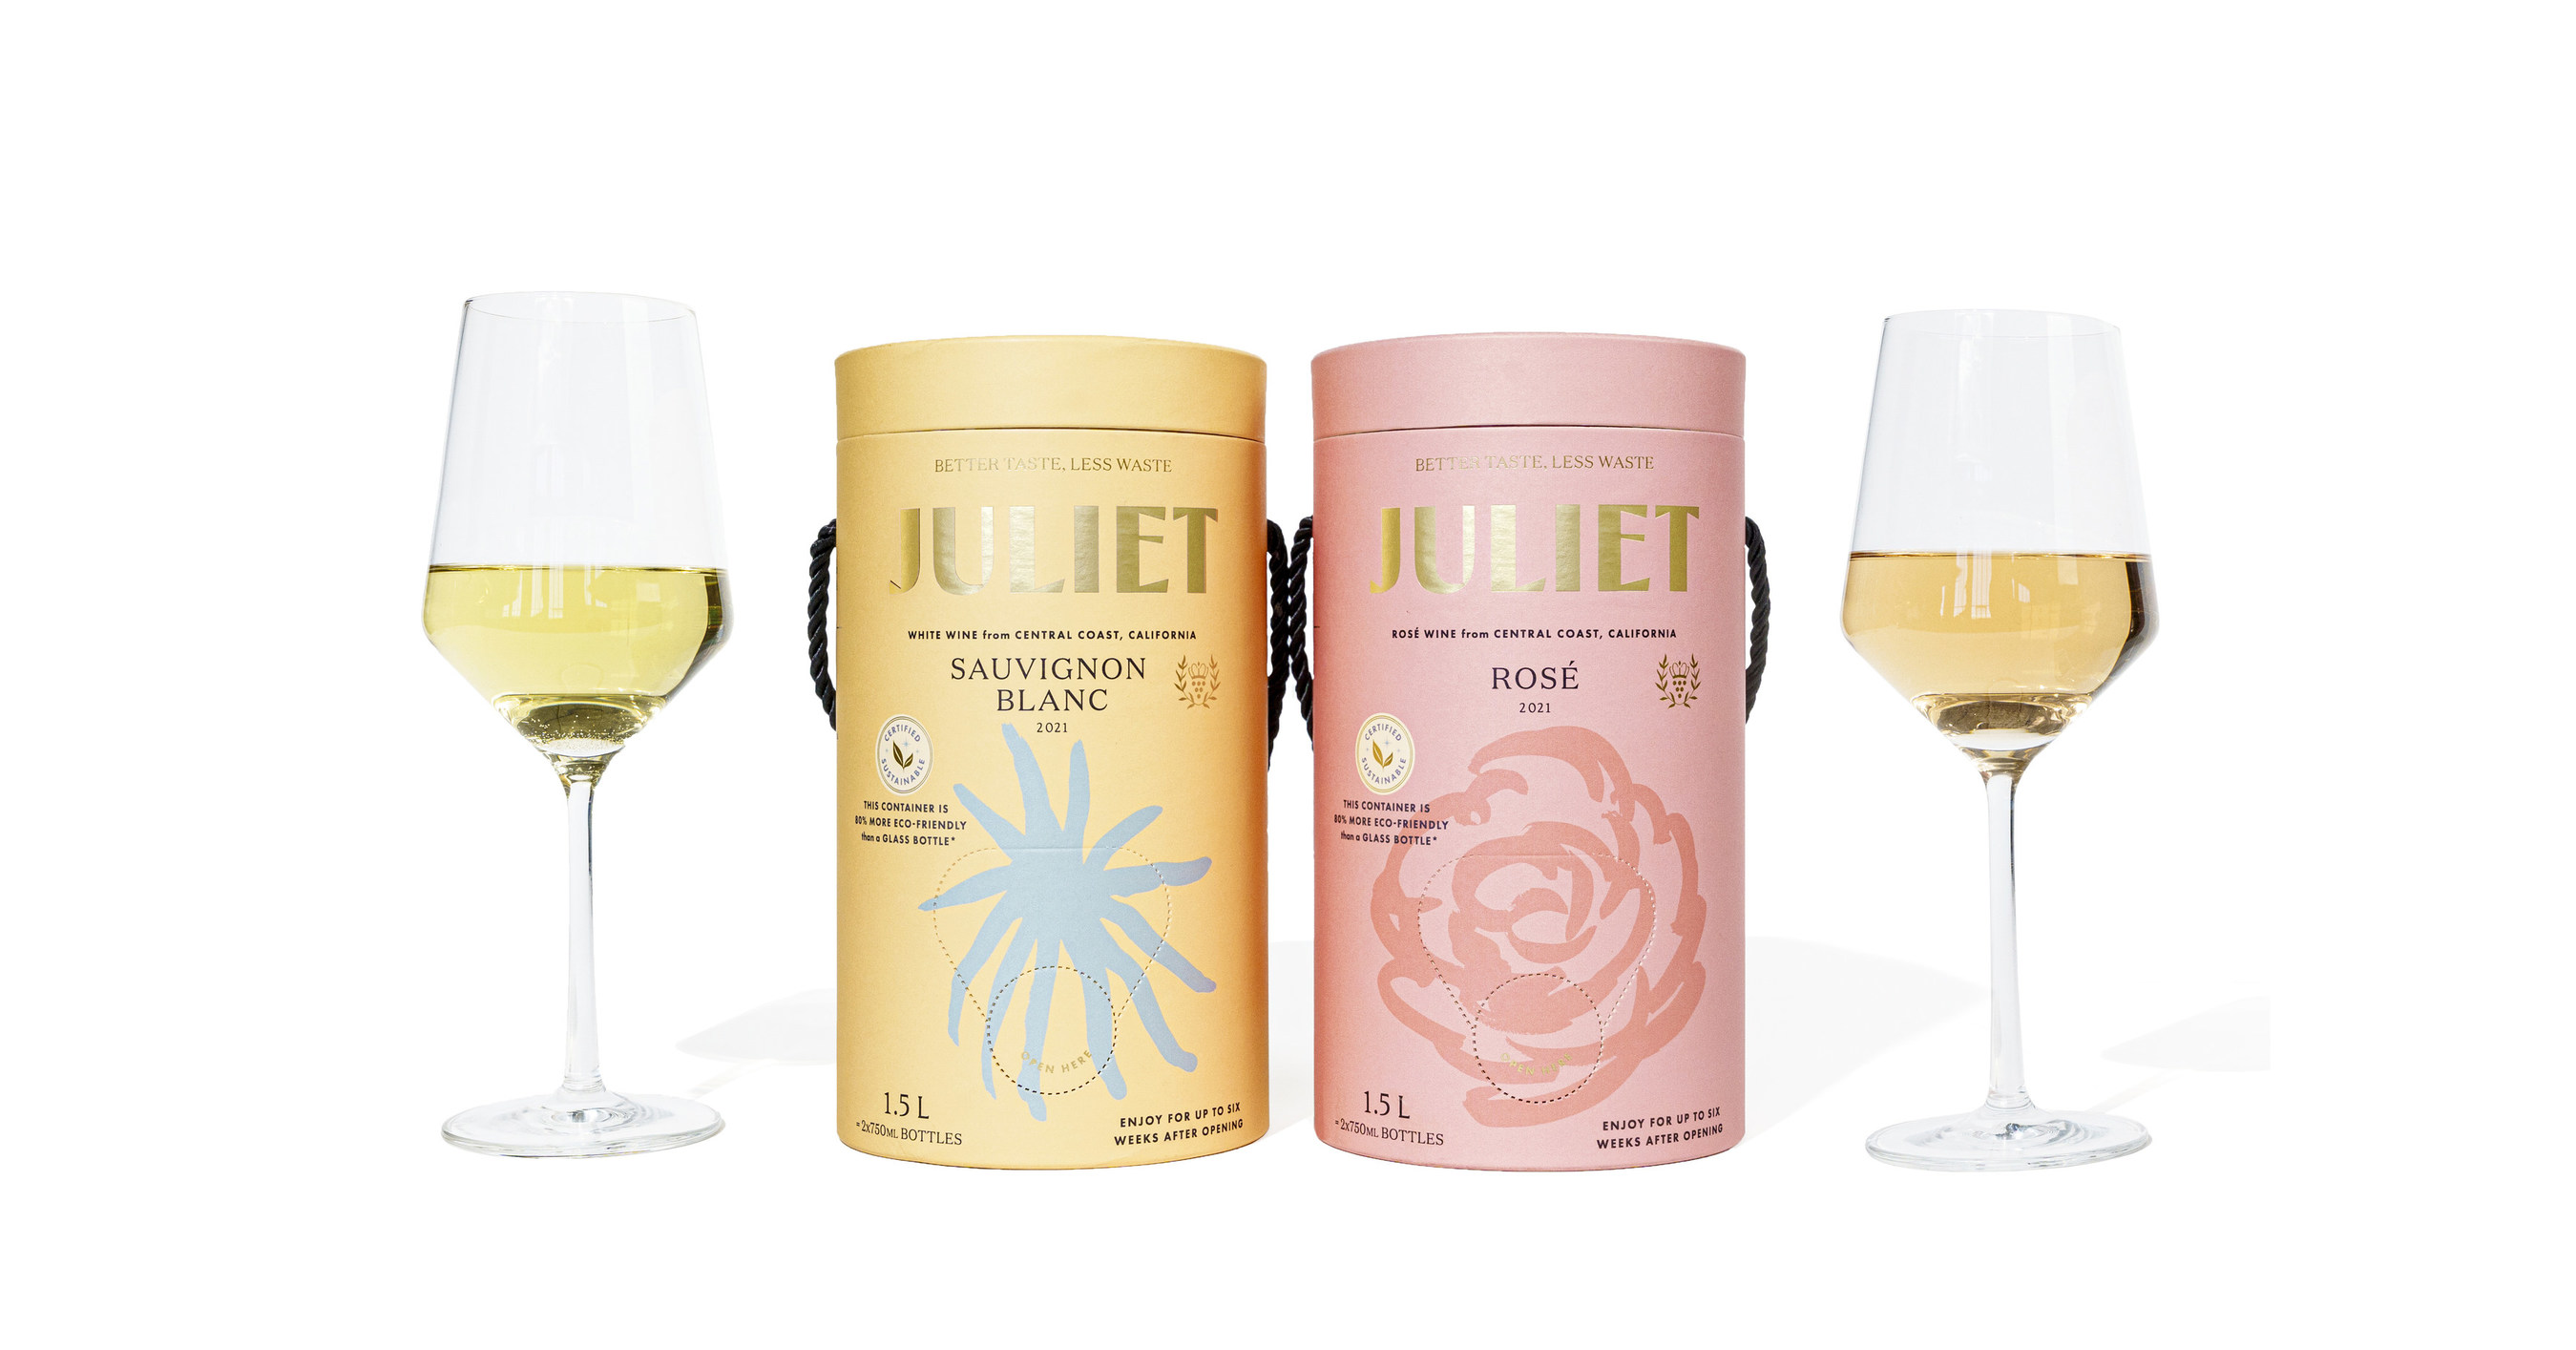 NEW LUXURY WINE BRAND, JULIET, LAUNCHES WITH SUSTAINABILITY AT THE FOREFRONT